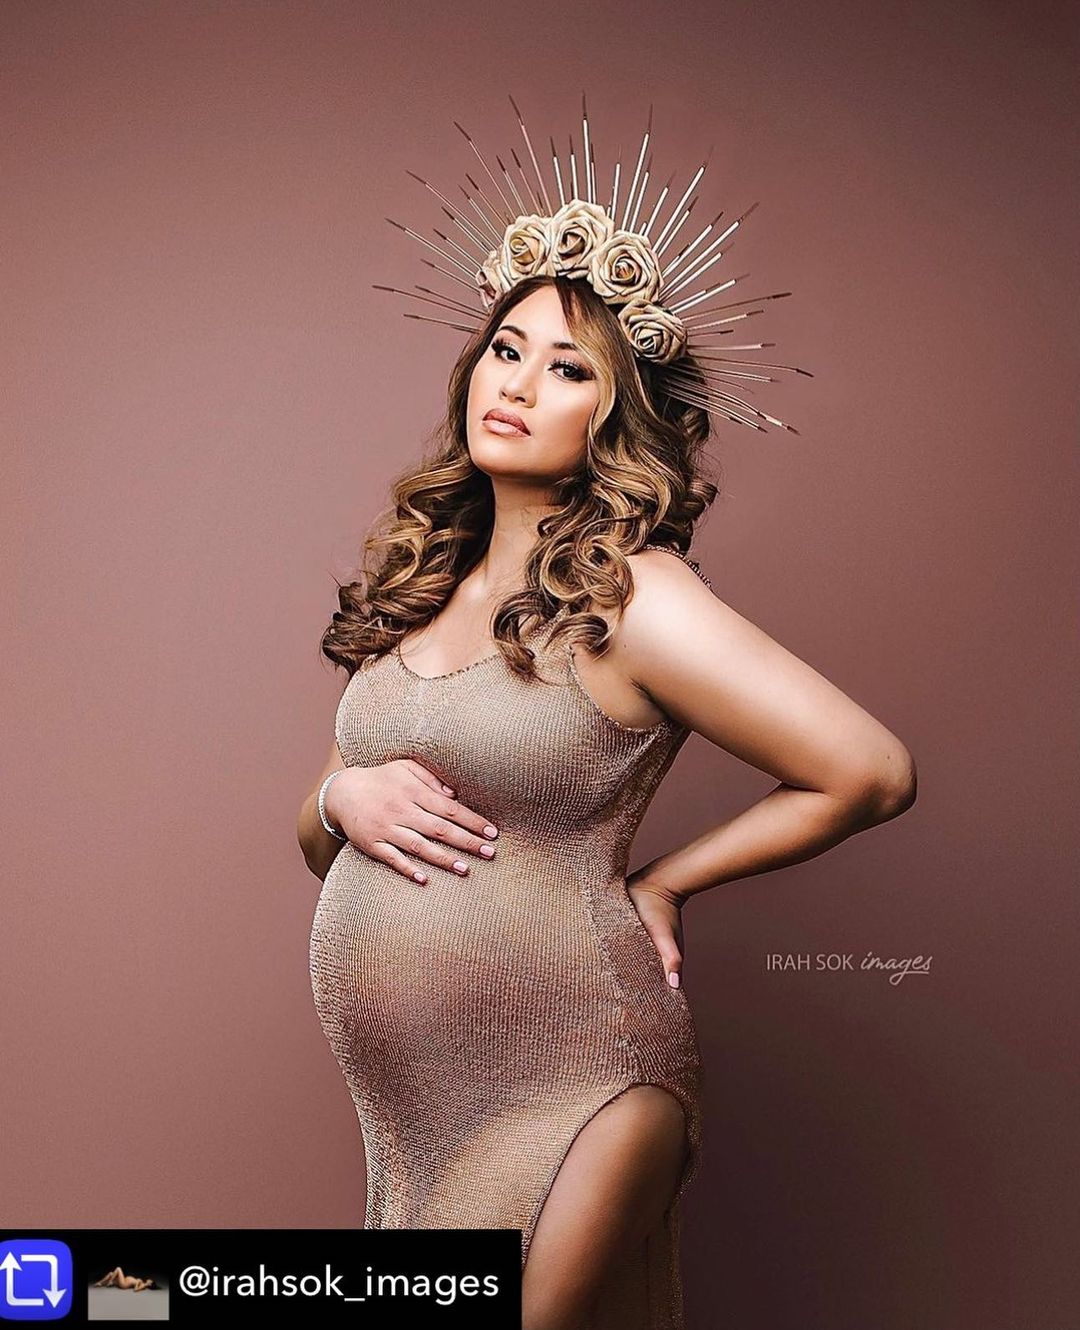 This gorgeous Cleopatra Sensual Maternity Dress Gown is in a class of its own. Wear this maternity dress to feel your sensuality during your pregnancy or for your maternity photoshoot or boudoir photos. Even use it as a over your swimsuit as a cover. 